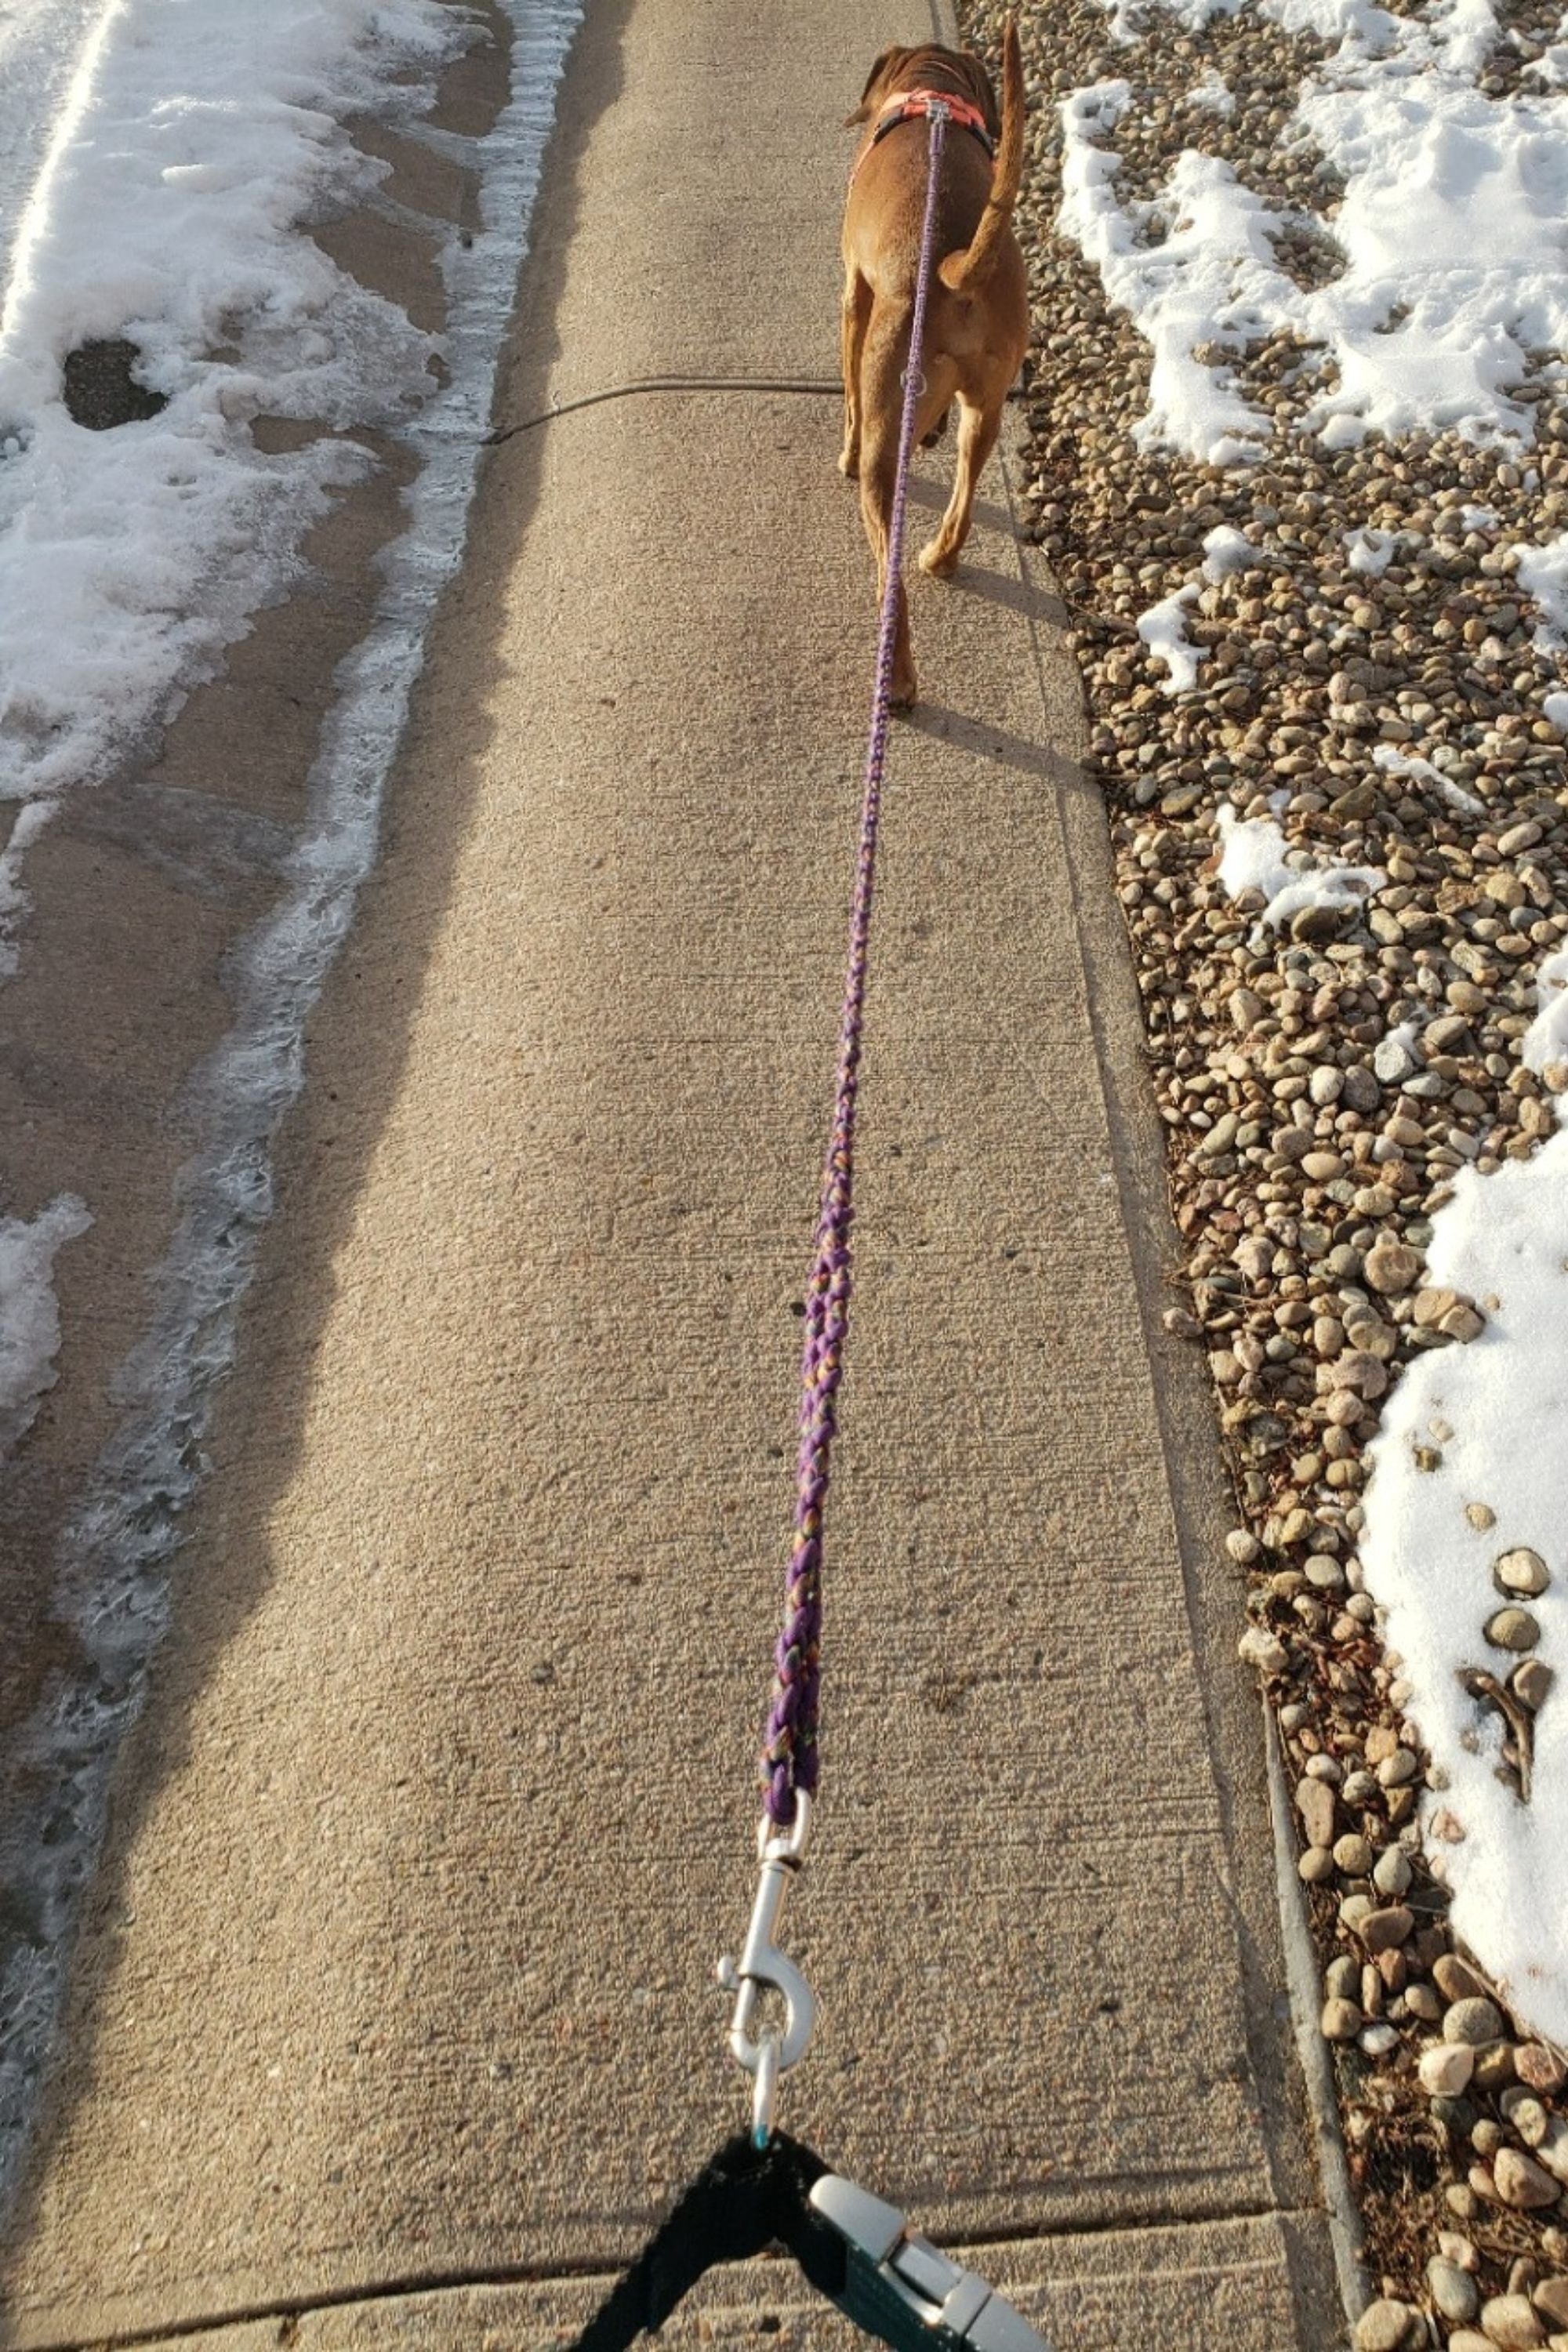 Photo of a dog walking at the end of a purple and rainbow paracord leash that also shows the hardware clipped to a leash belt at the human end.